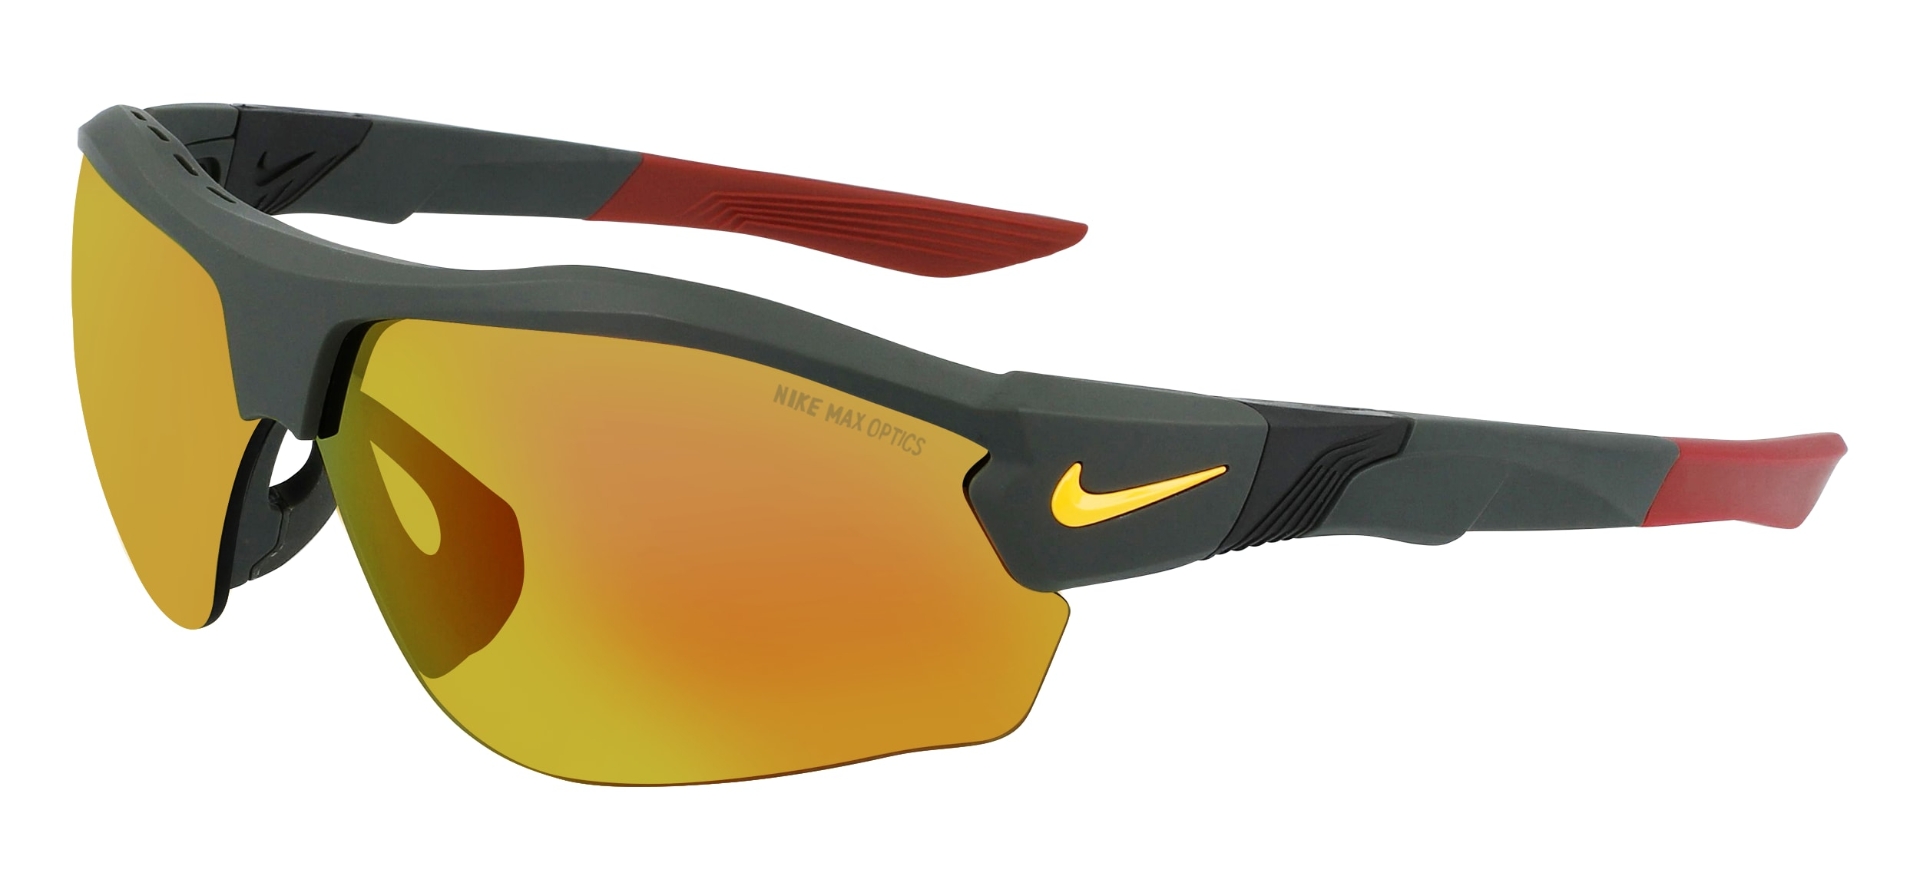 Nike Show X3 men's sunglasses size guide. Grey frame with red and yellow details with grey/orange lenses.